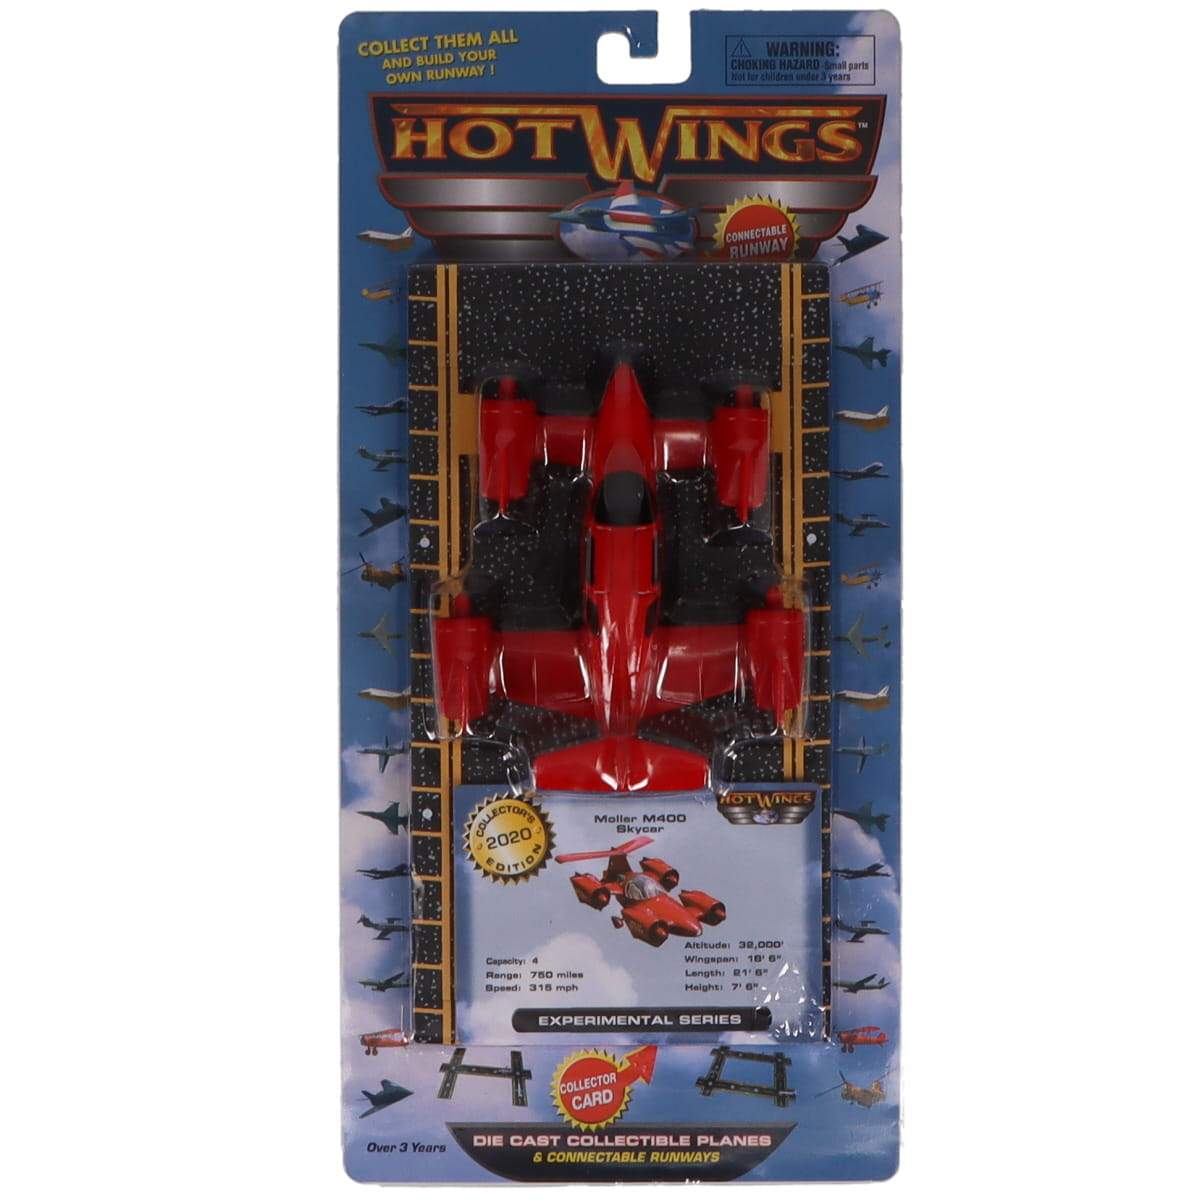 Hot Wings Moller M400 Skycar Die Cast Aircraft with Connectible Runway - PilotMall.com